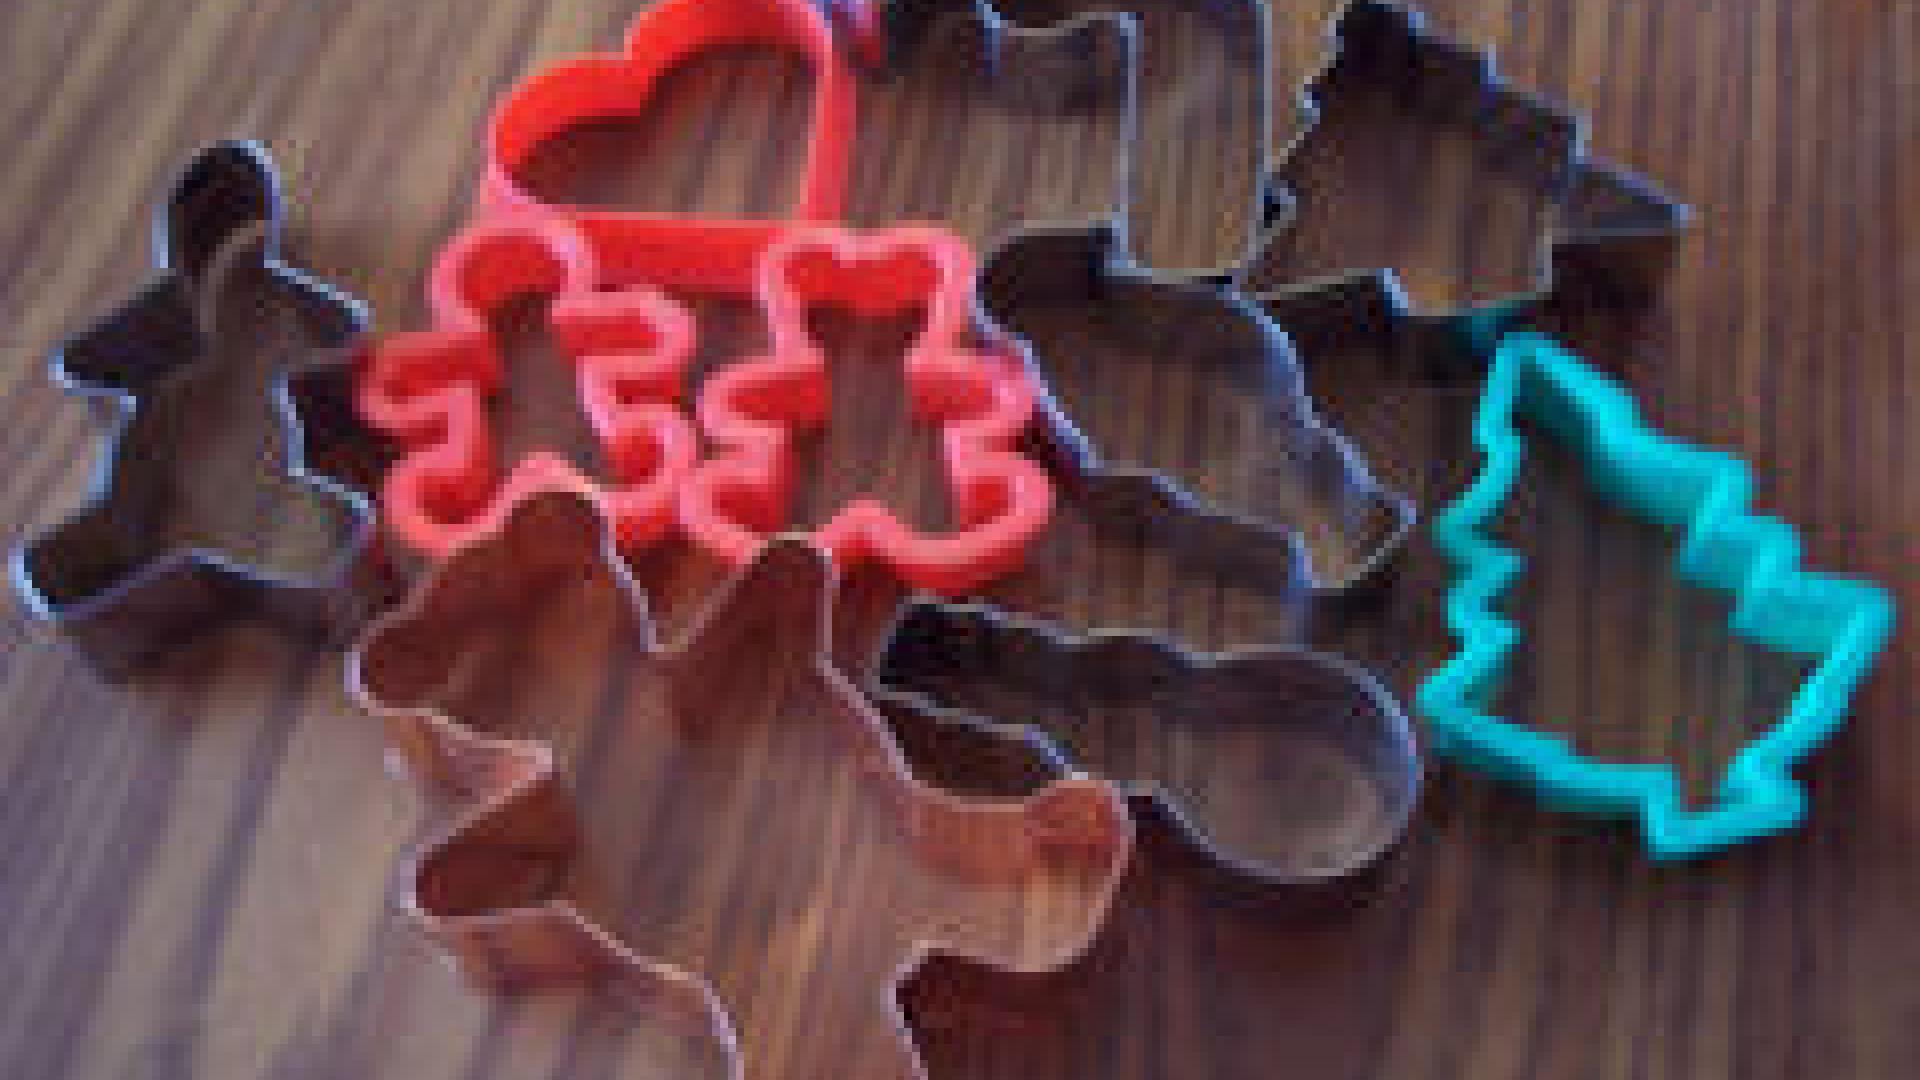 cookie cutters